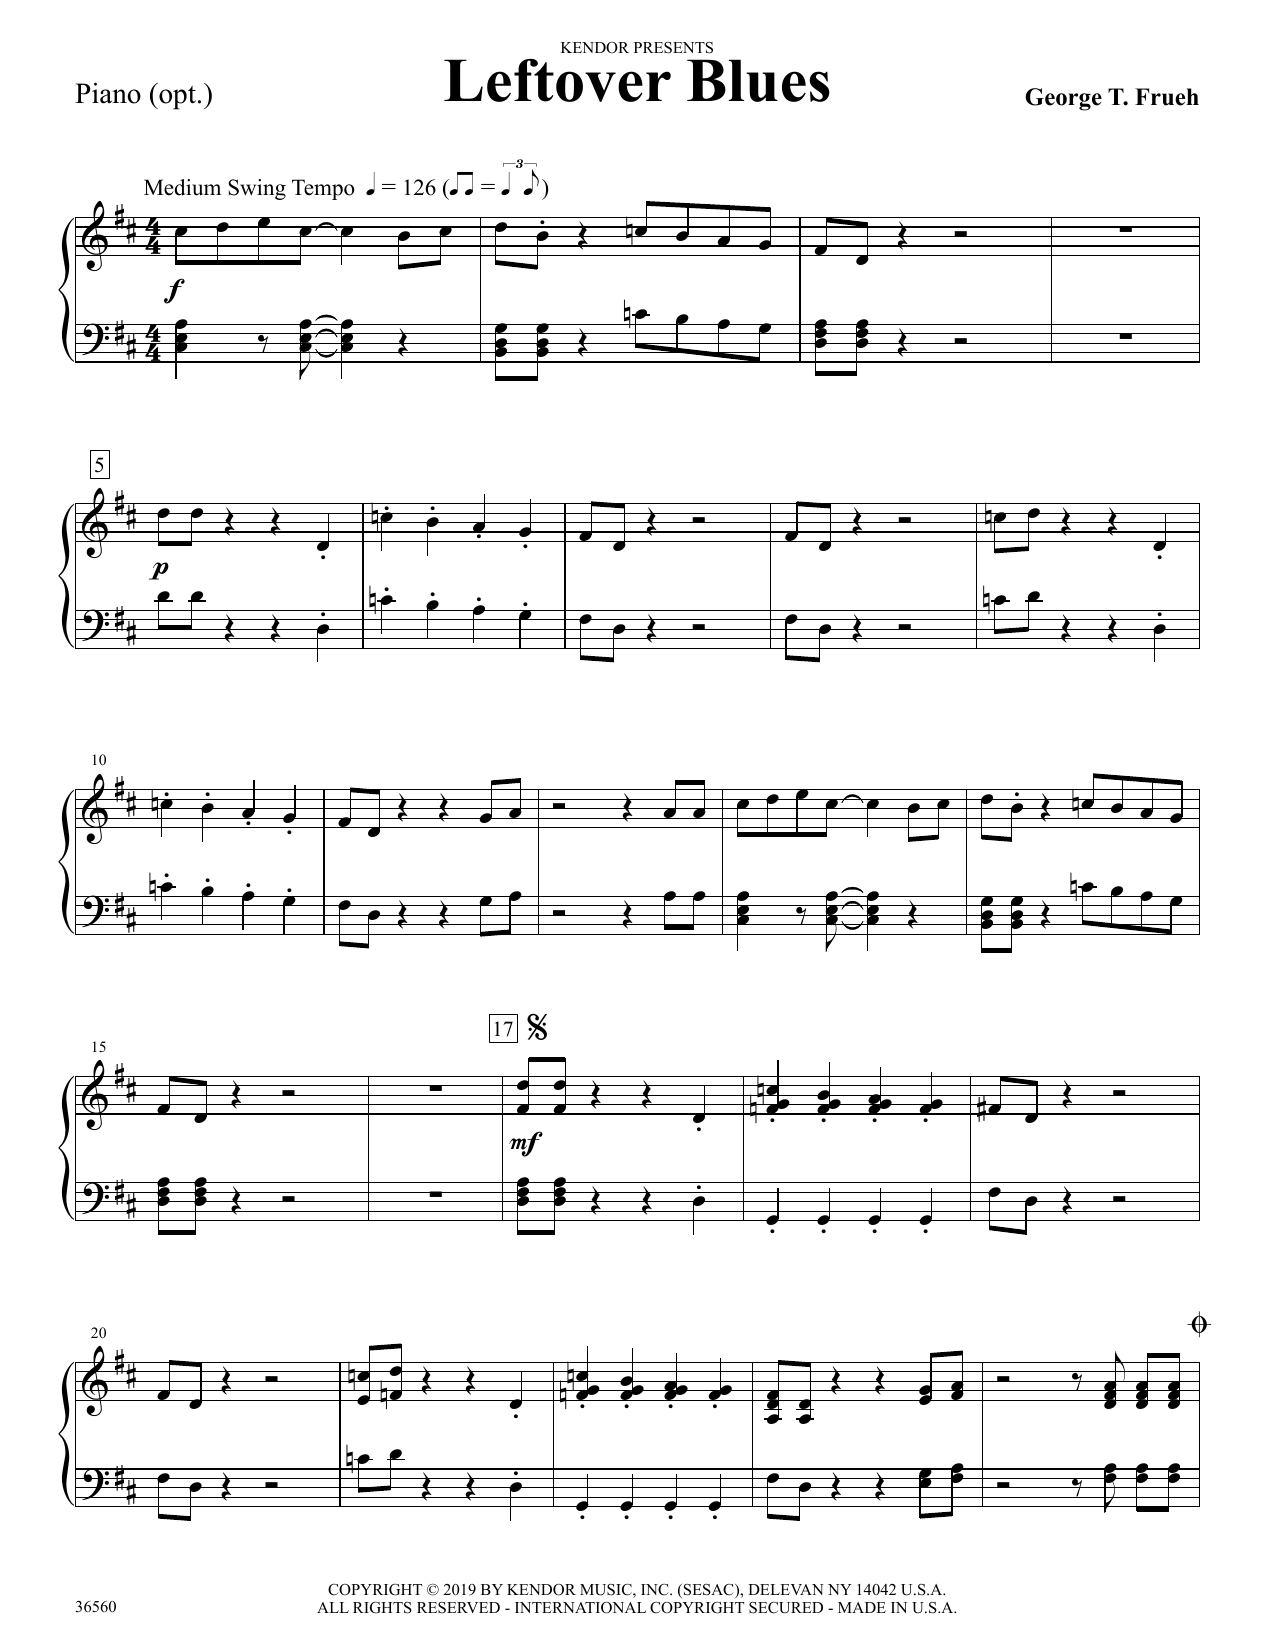 Download George Frueh Leftover Blues - Piano Accompaniment Sheet Music